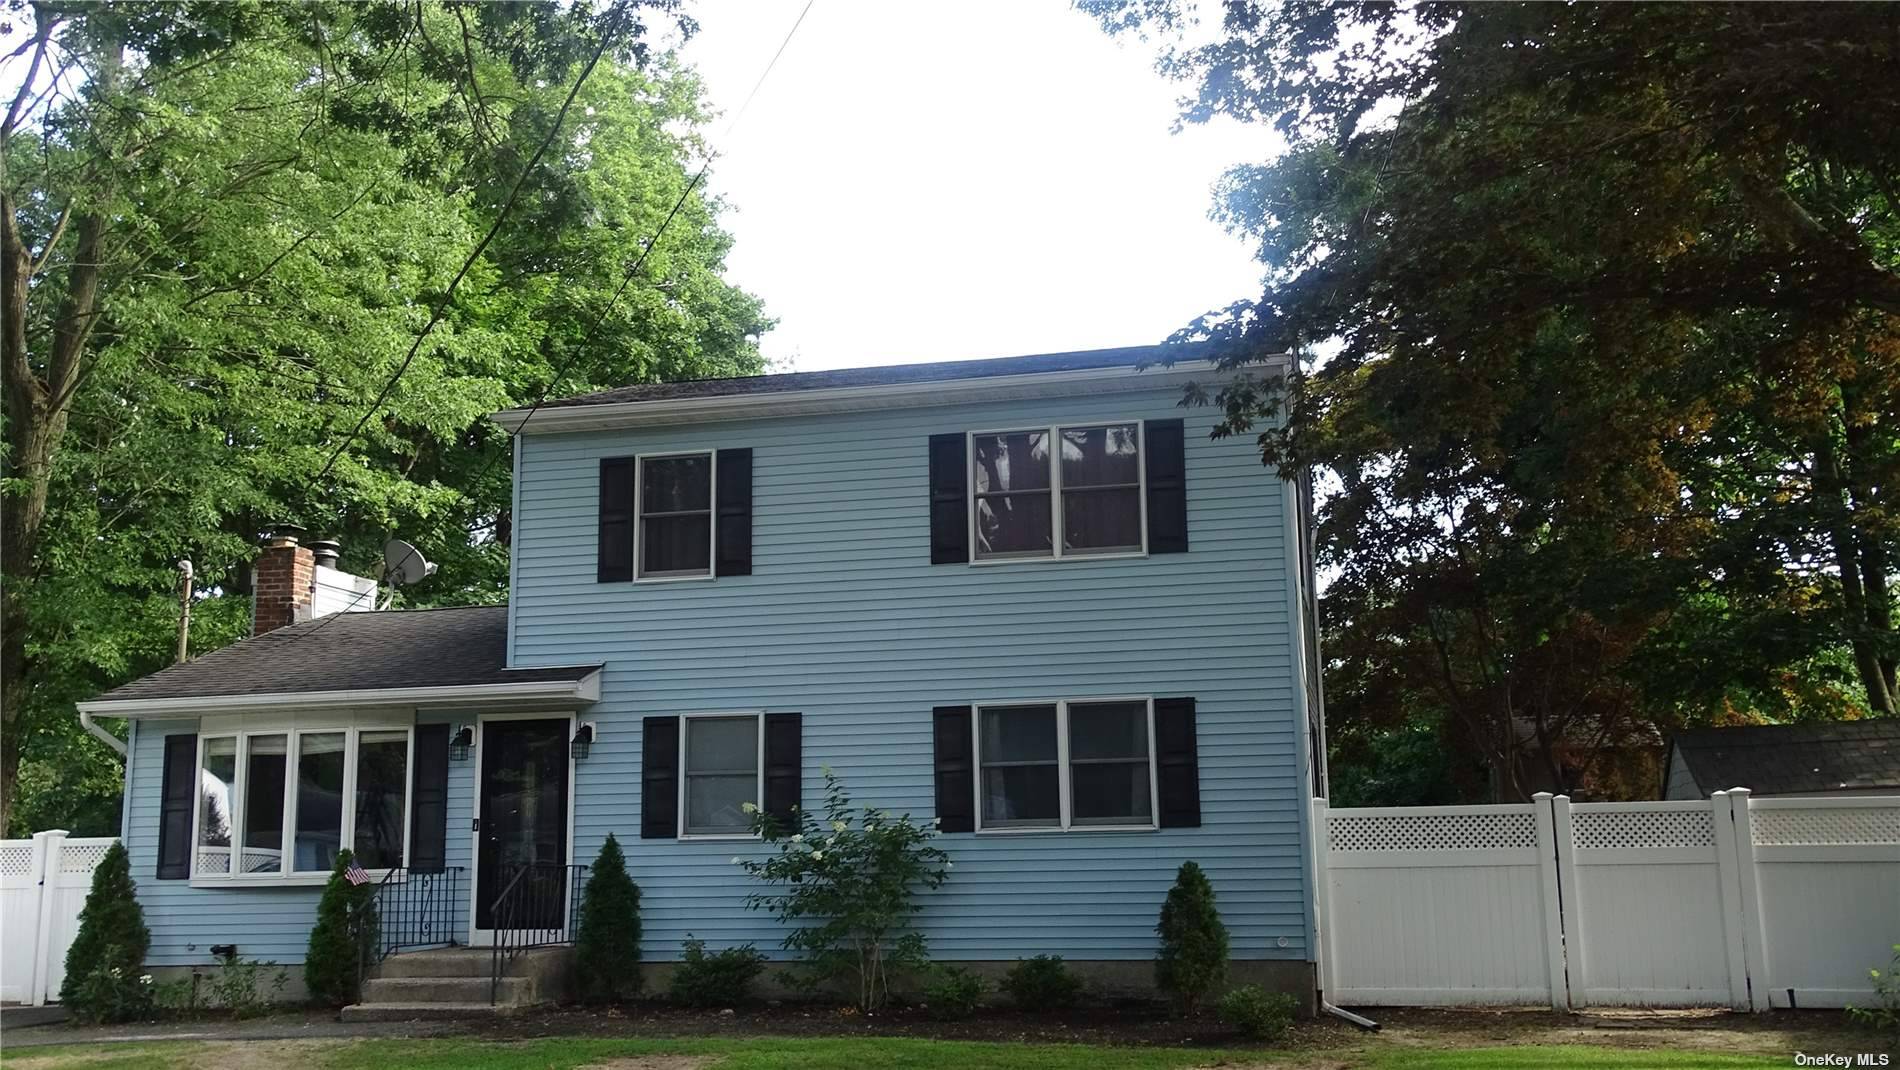 Welcome home to this 4 bedroom 2 bath colonial in sought out SWR School District.